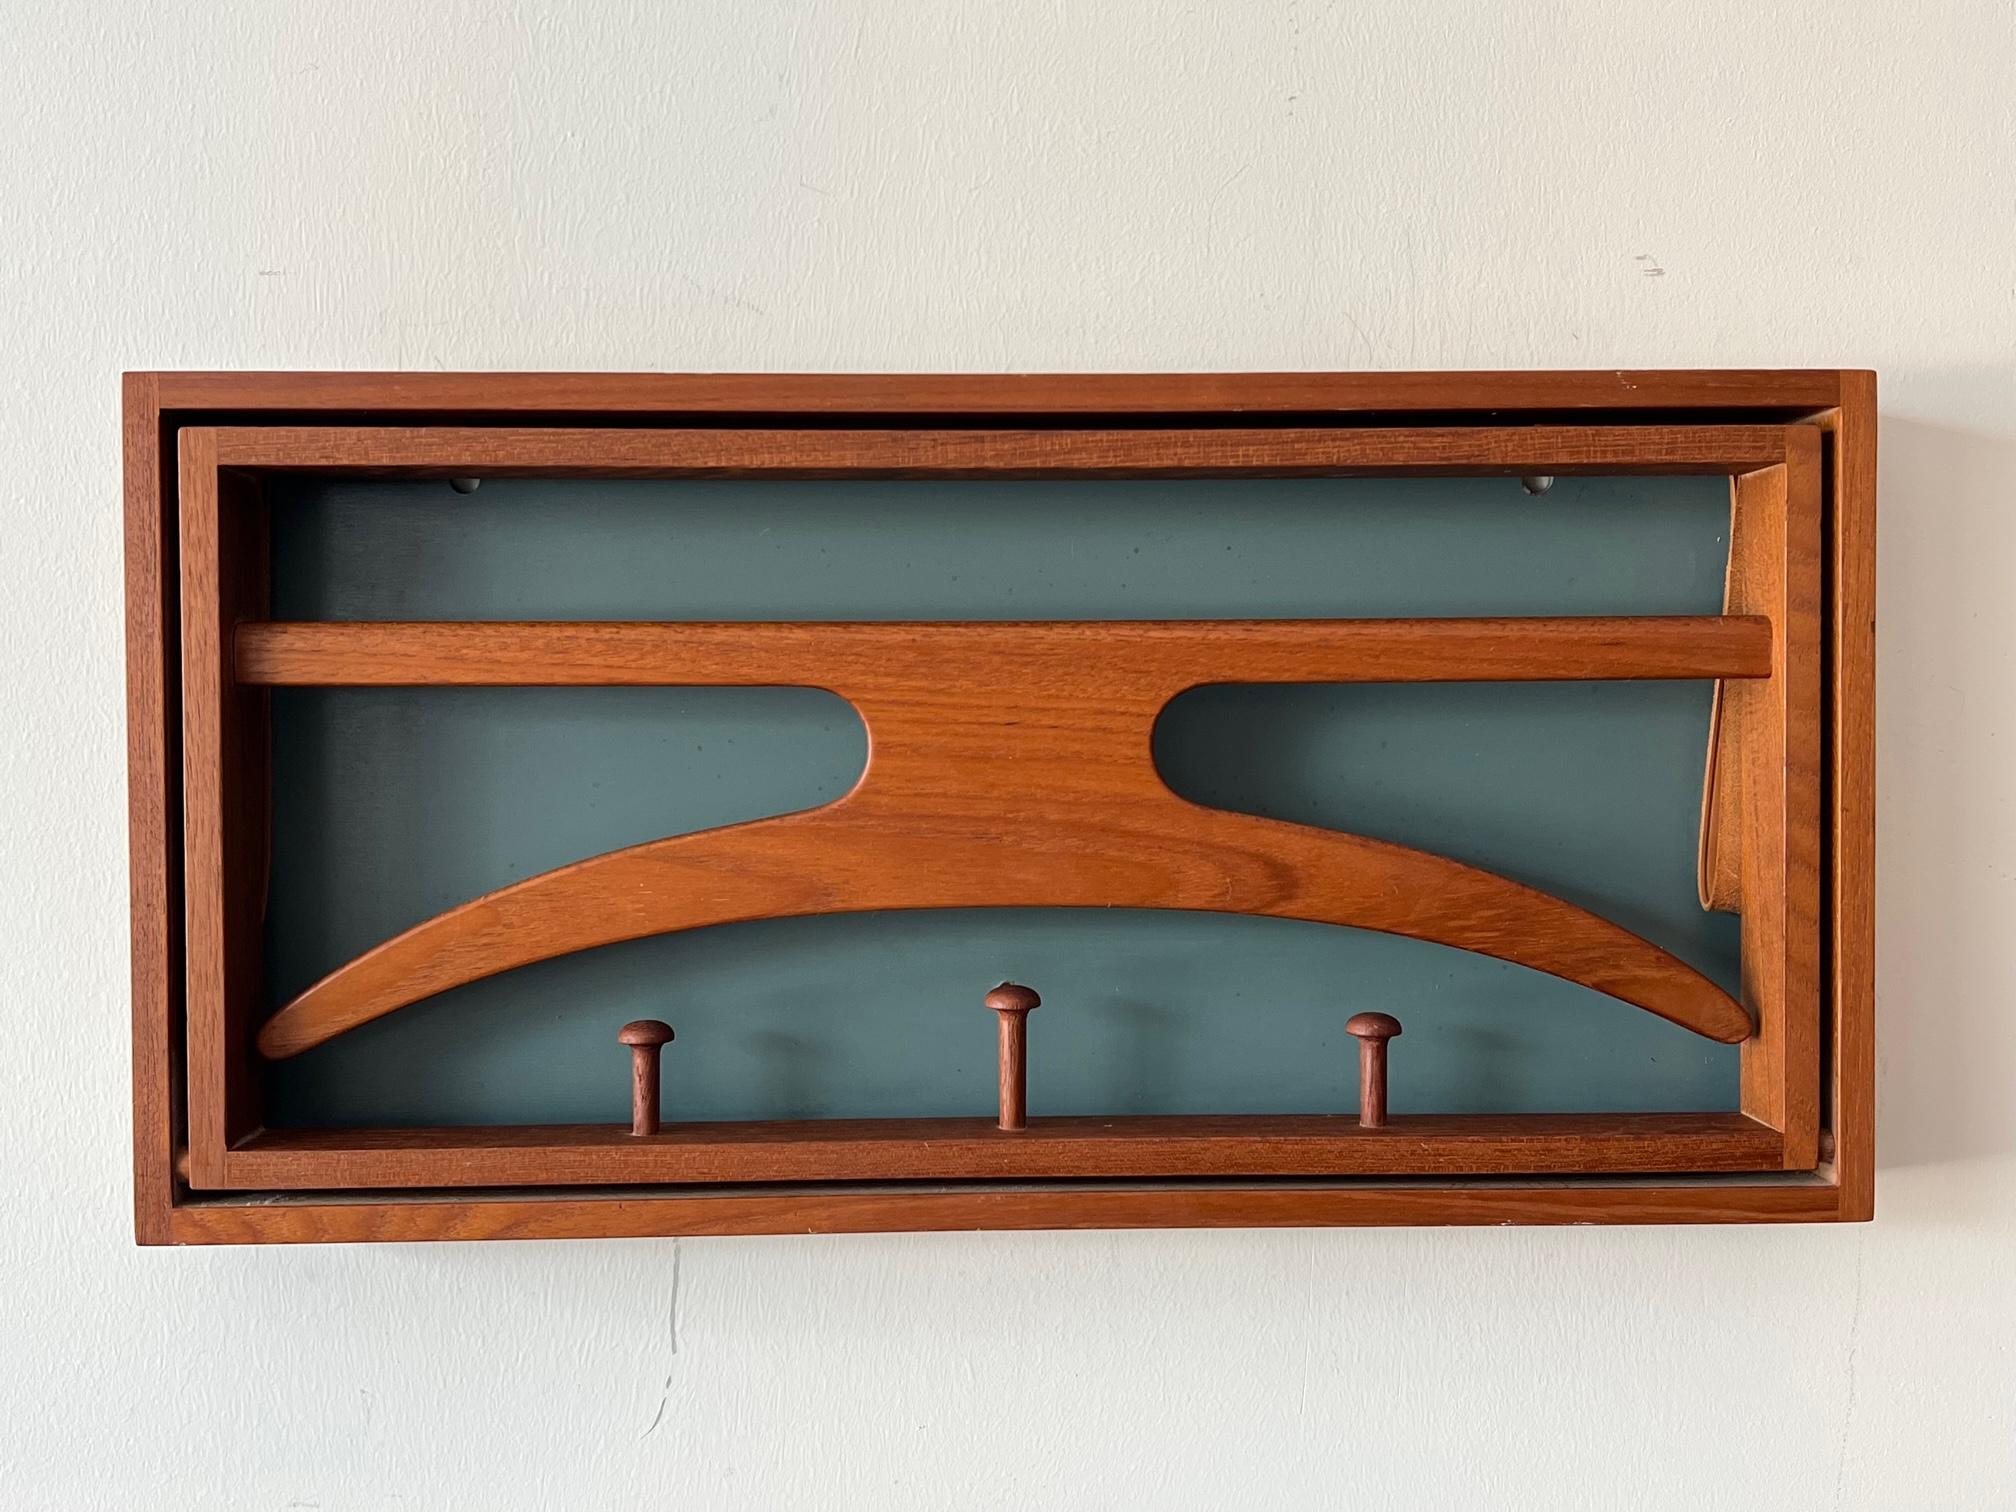 Adam Hoff & Poul Østergaard, Folding Coat Rack, manufactured by Virum Møbelsnedkeri, ca' 1960's.  For wall mounting, this ingenious design features a coat hanger which pulls down, supported with leather straps, giving access to 3 carved pegs behind